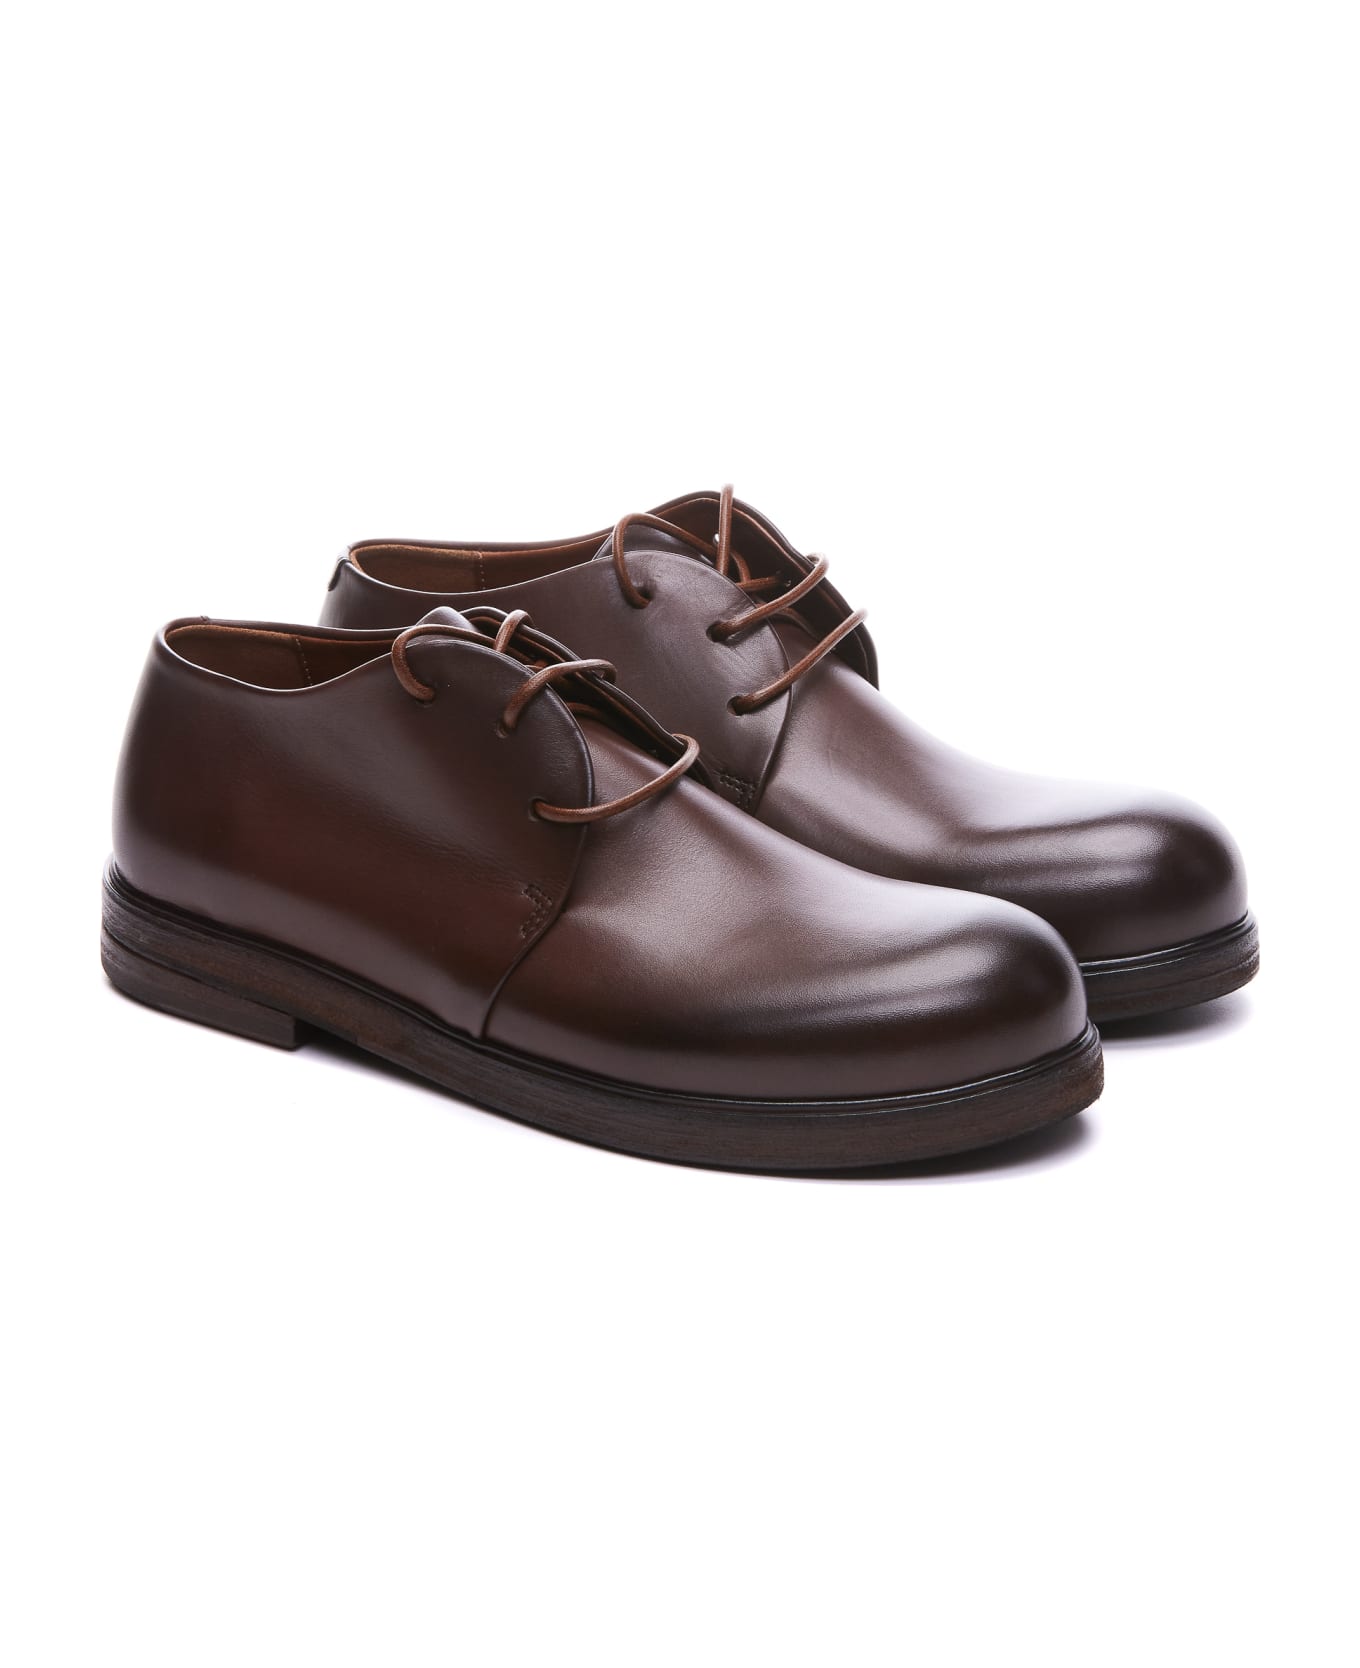 Marsell Zucca Derby Lace Up Shoes - Brown フラットシューズ